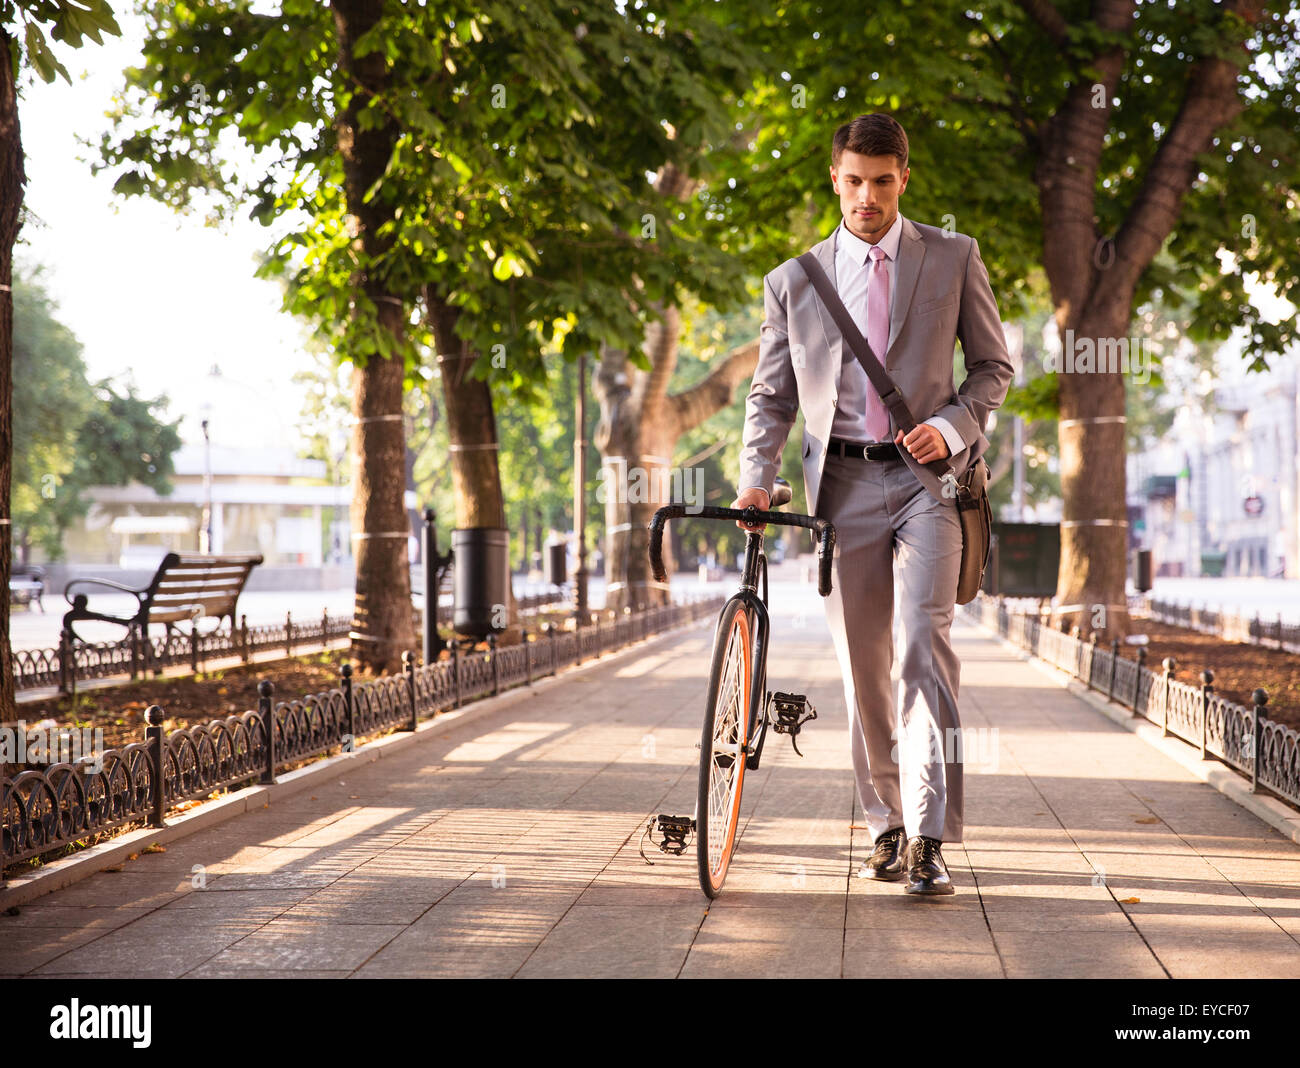 Pensive young businessman walking with bicycle on the street in town Stock Photo